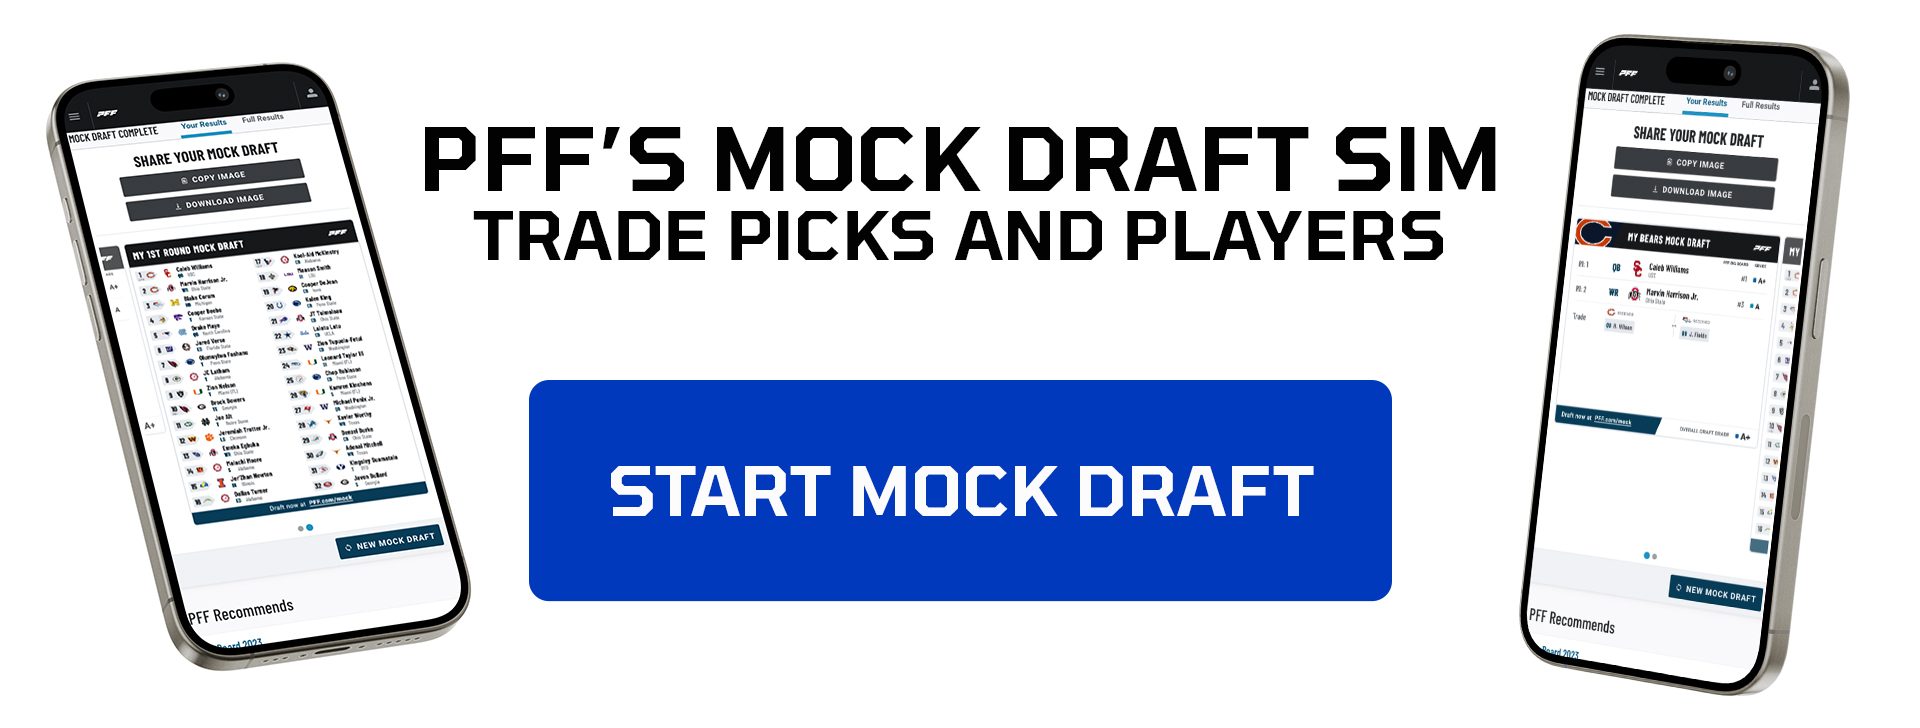 2024 NFL Draft guide: Who could be on the radar of biggest losers?